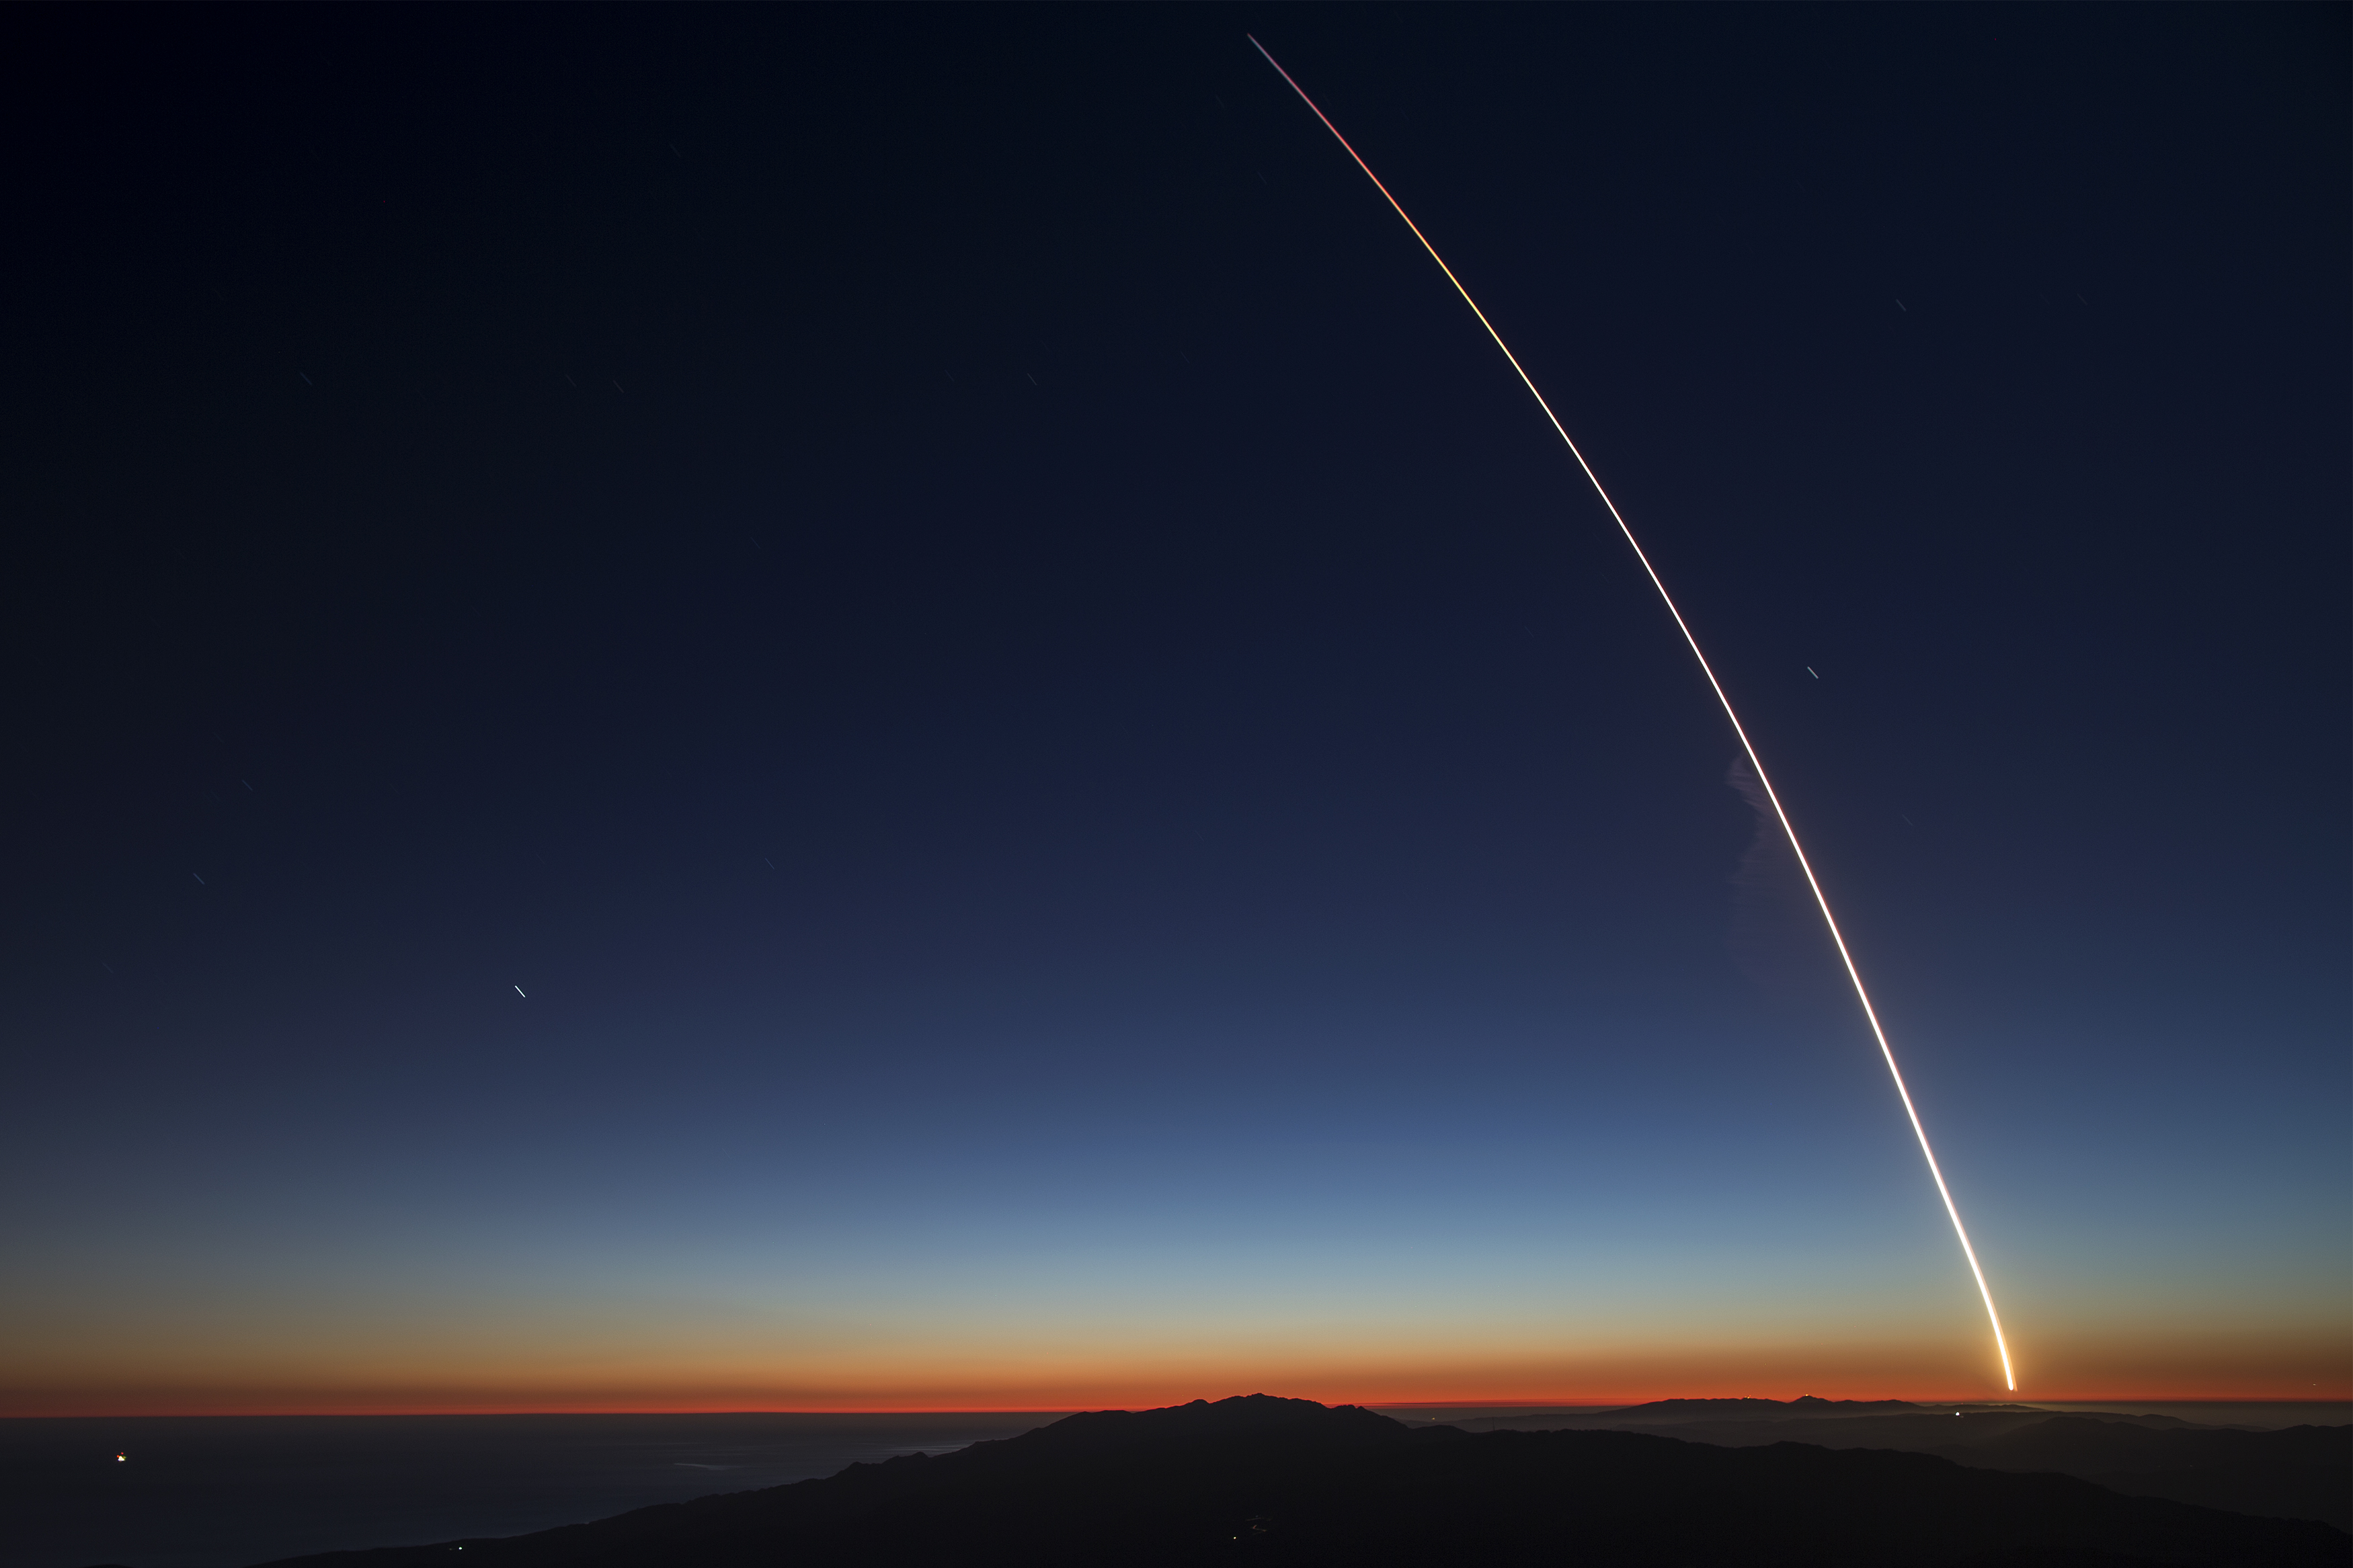 The SpaceX Falcon 9 rocket launches from Vandenberg Air Force Base carrying the SAOCOM 1A and ITASAT 1 satellites, as seen during a long exposure on October 7, 2018 near Santa Barbara, California. (David McNew—Getty Images)